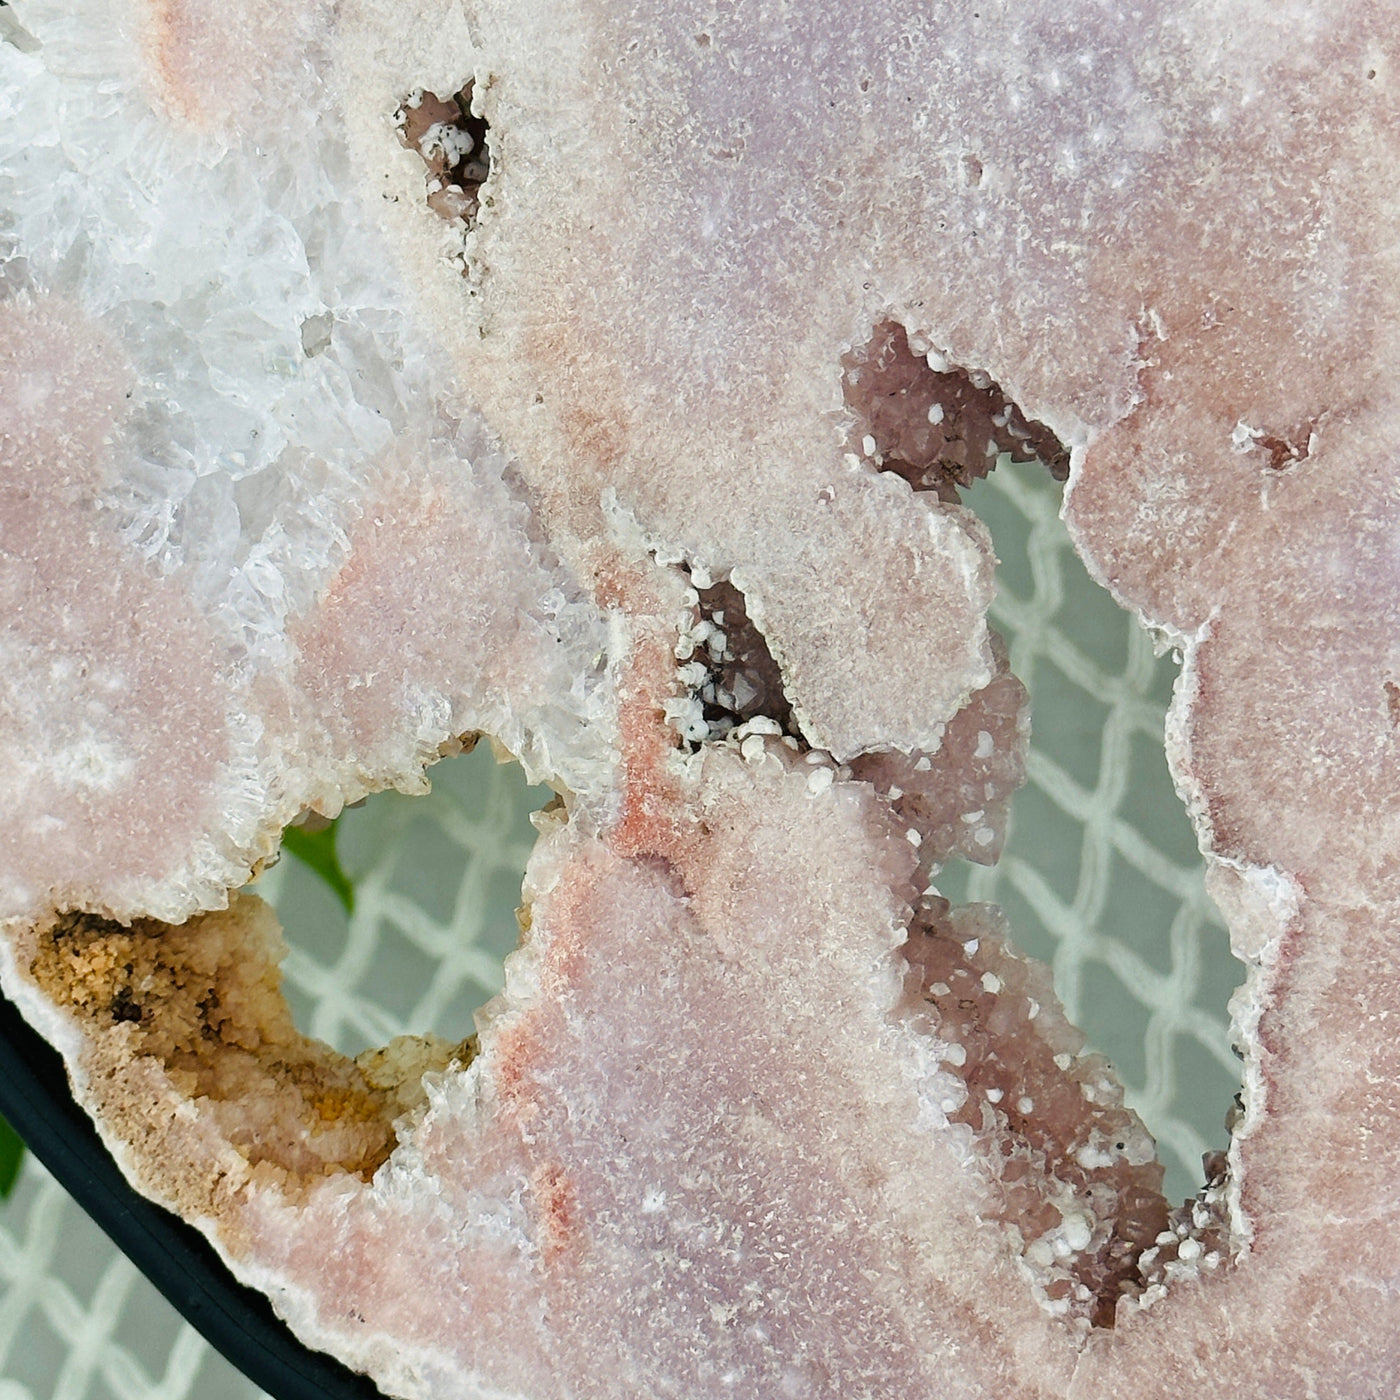 up close shot of druzy on pink amethyst wing